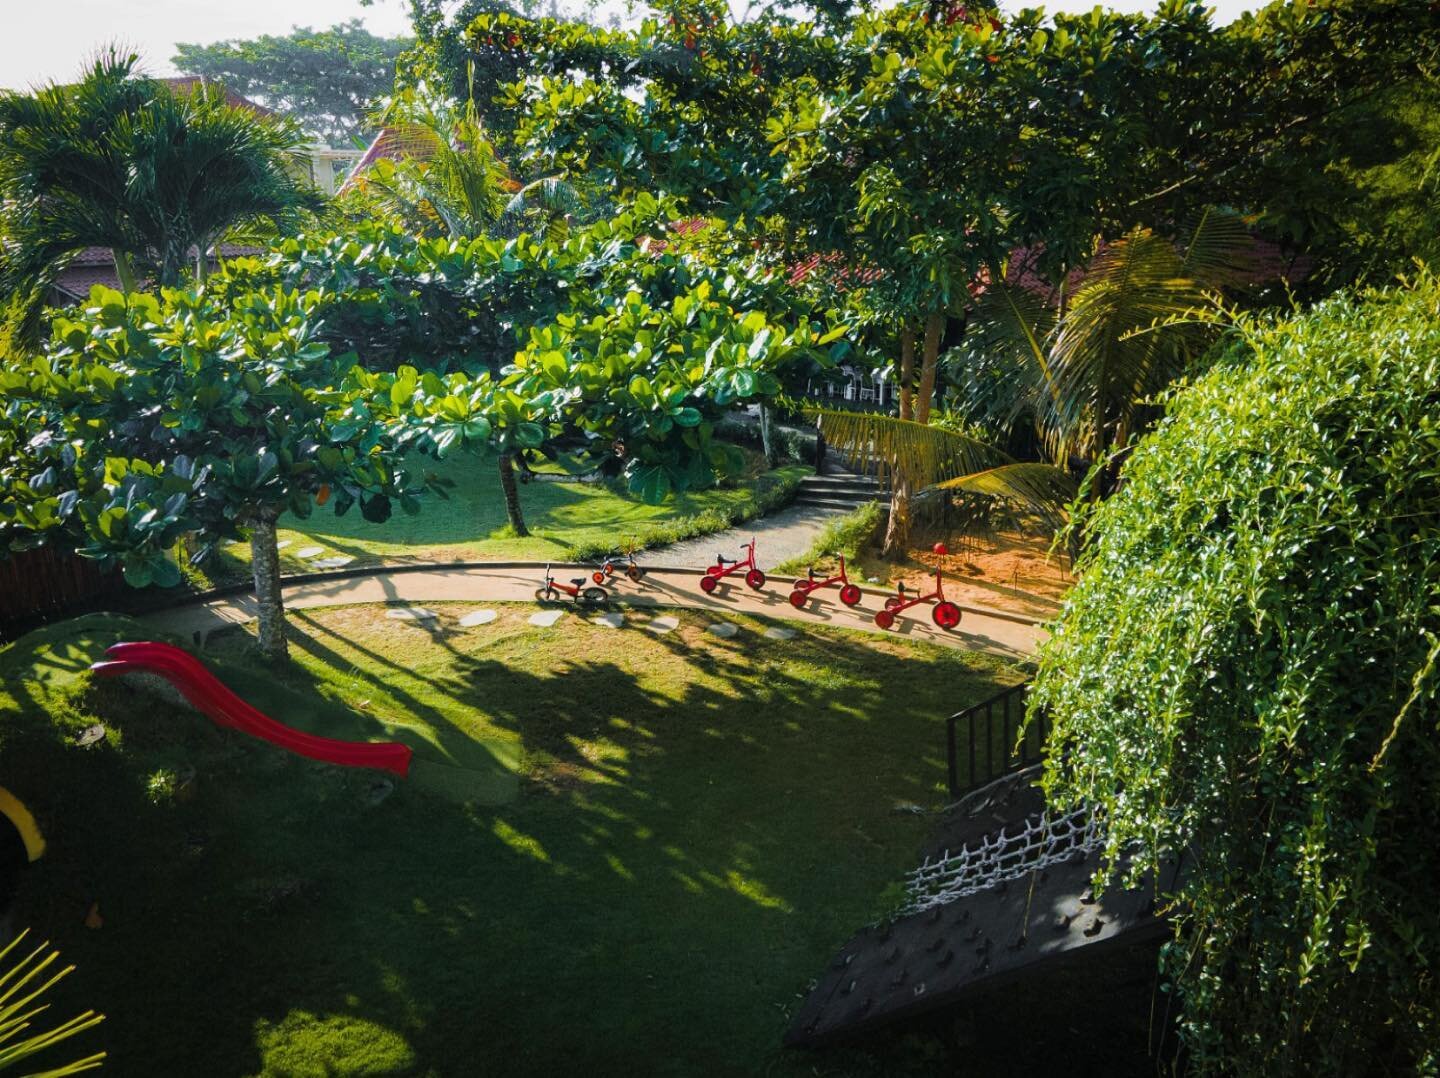 Our lush tropical play and learning space welcomes families from 15 months to 6 years old. For a tour or if you wish to inquire about our various programs, connect with us via Whats App at +62 8786 3550 300 or email us info@theanakatelier.com 🌳❤️